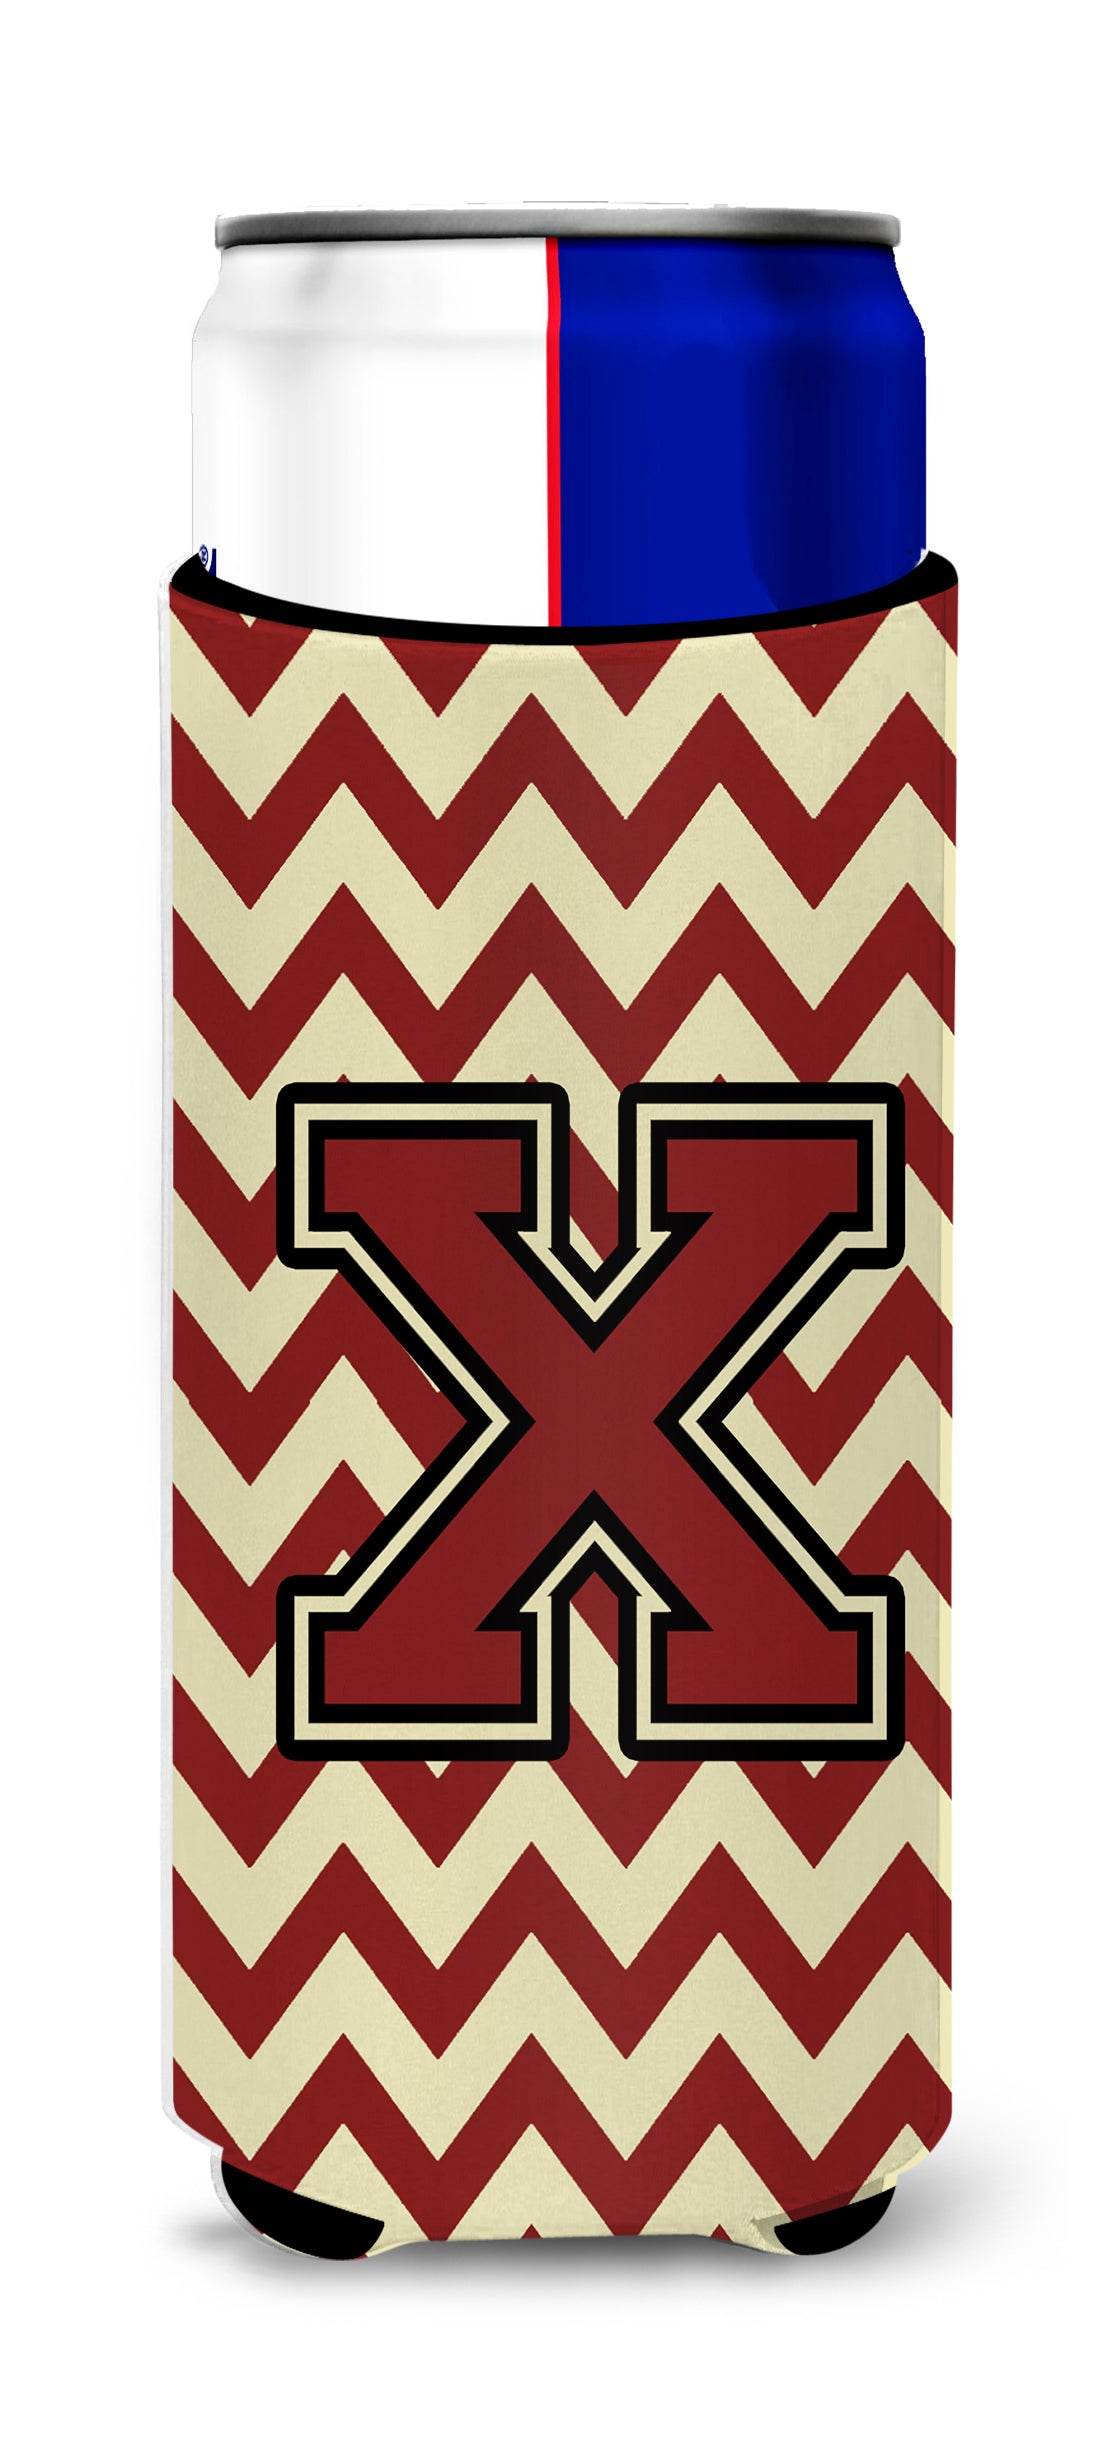 Letter X Chevron Maroon and Gold Ultra Beverage Insulators for slim cans CJ1061-XMUK.